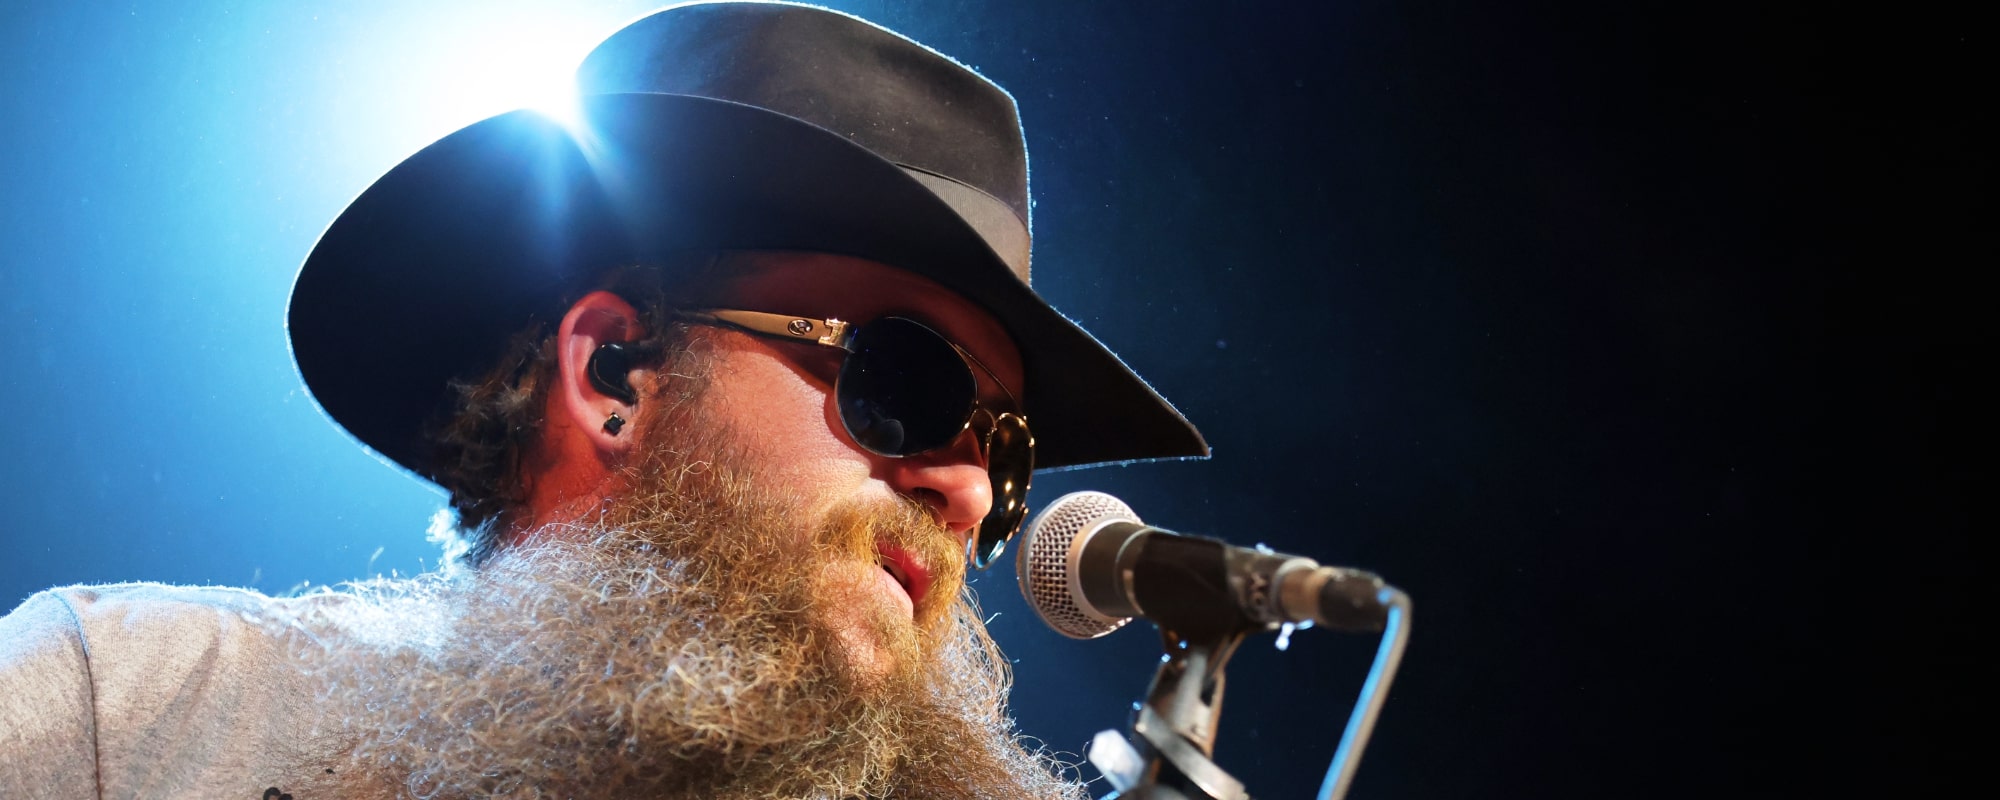 Cody Jinks Announces New Album ‘Change the Game’ with Vulnerable Single “Sober Thing”